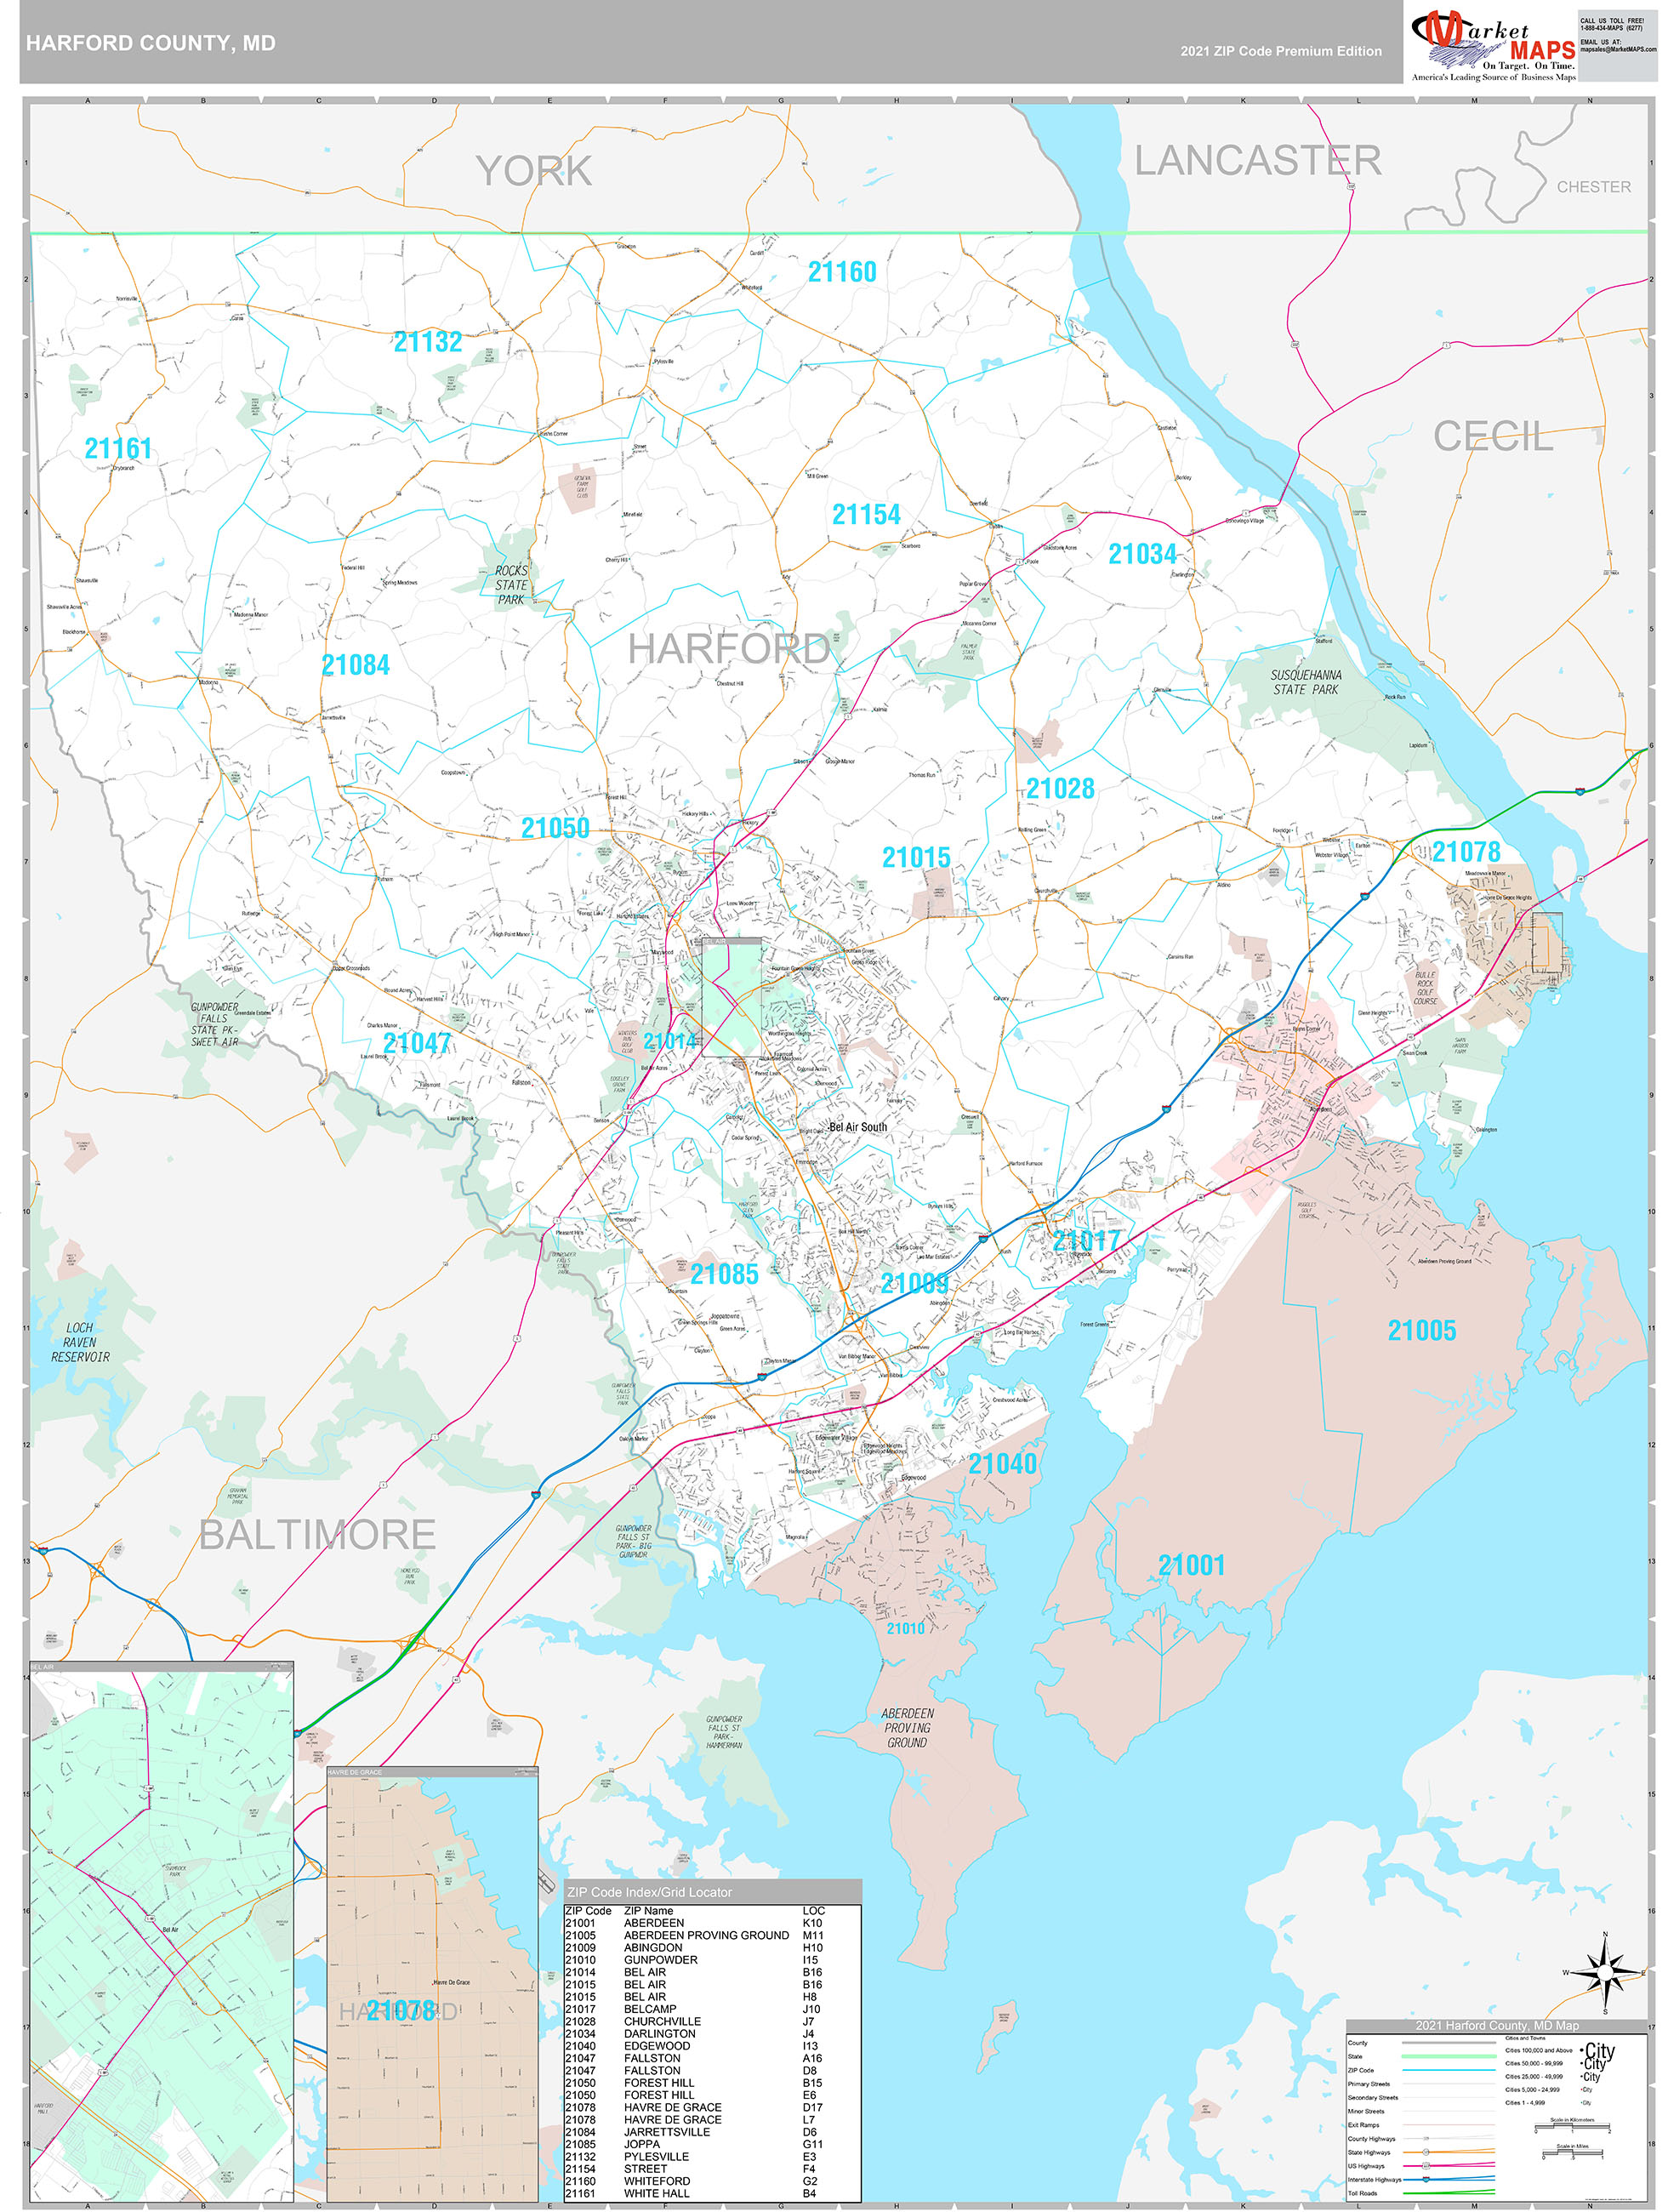 Harford County MD Wall Map Premium Style by MarketMAPS MapSales